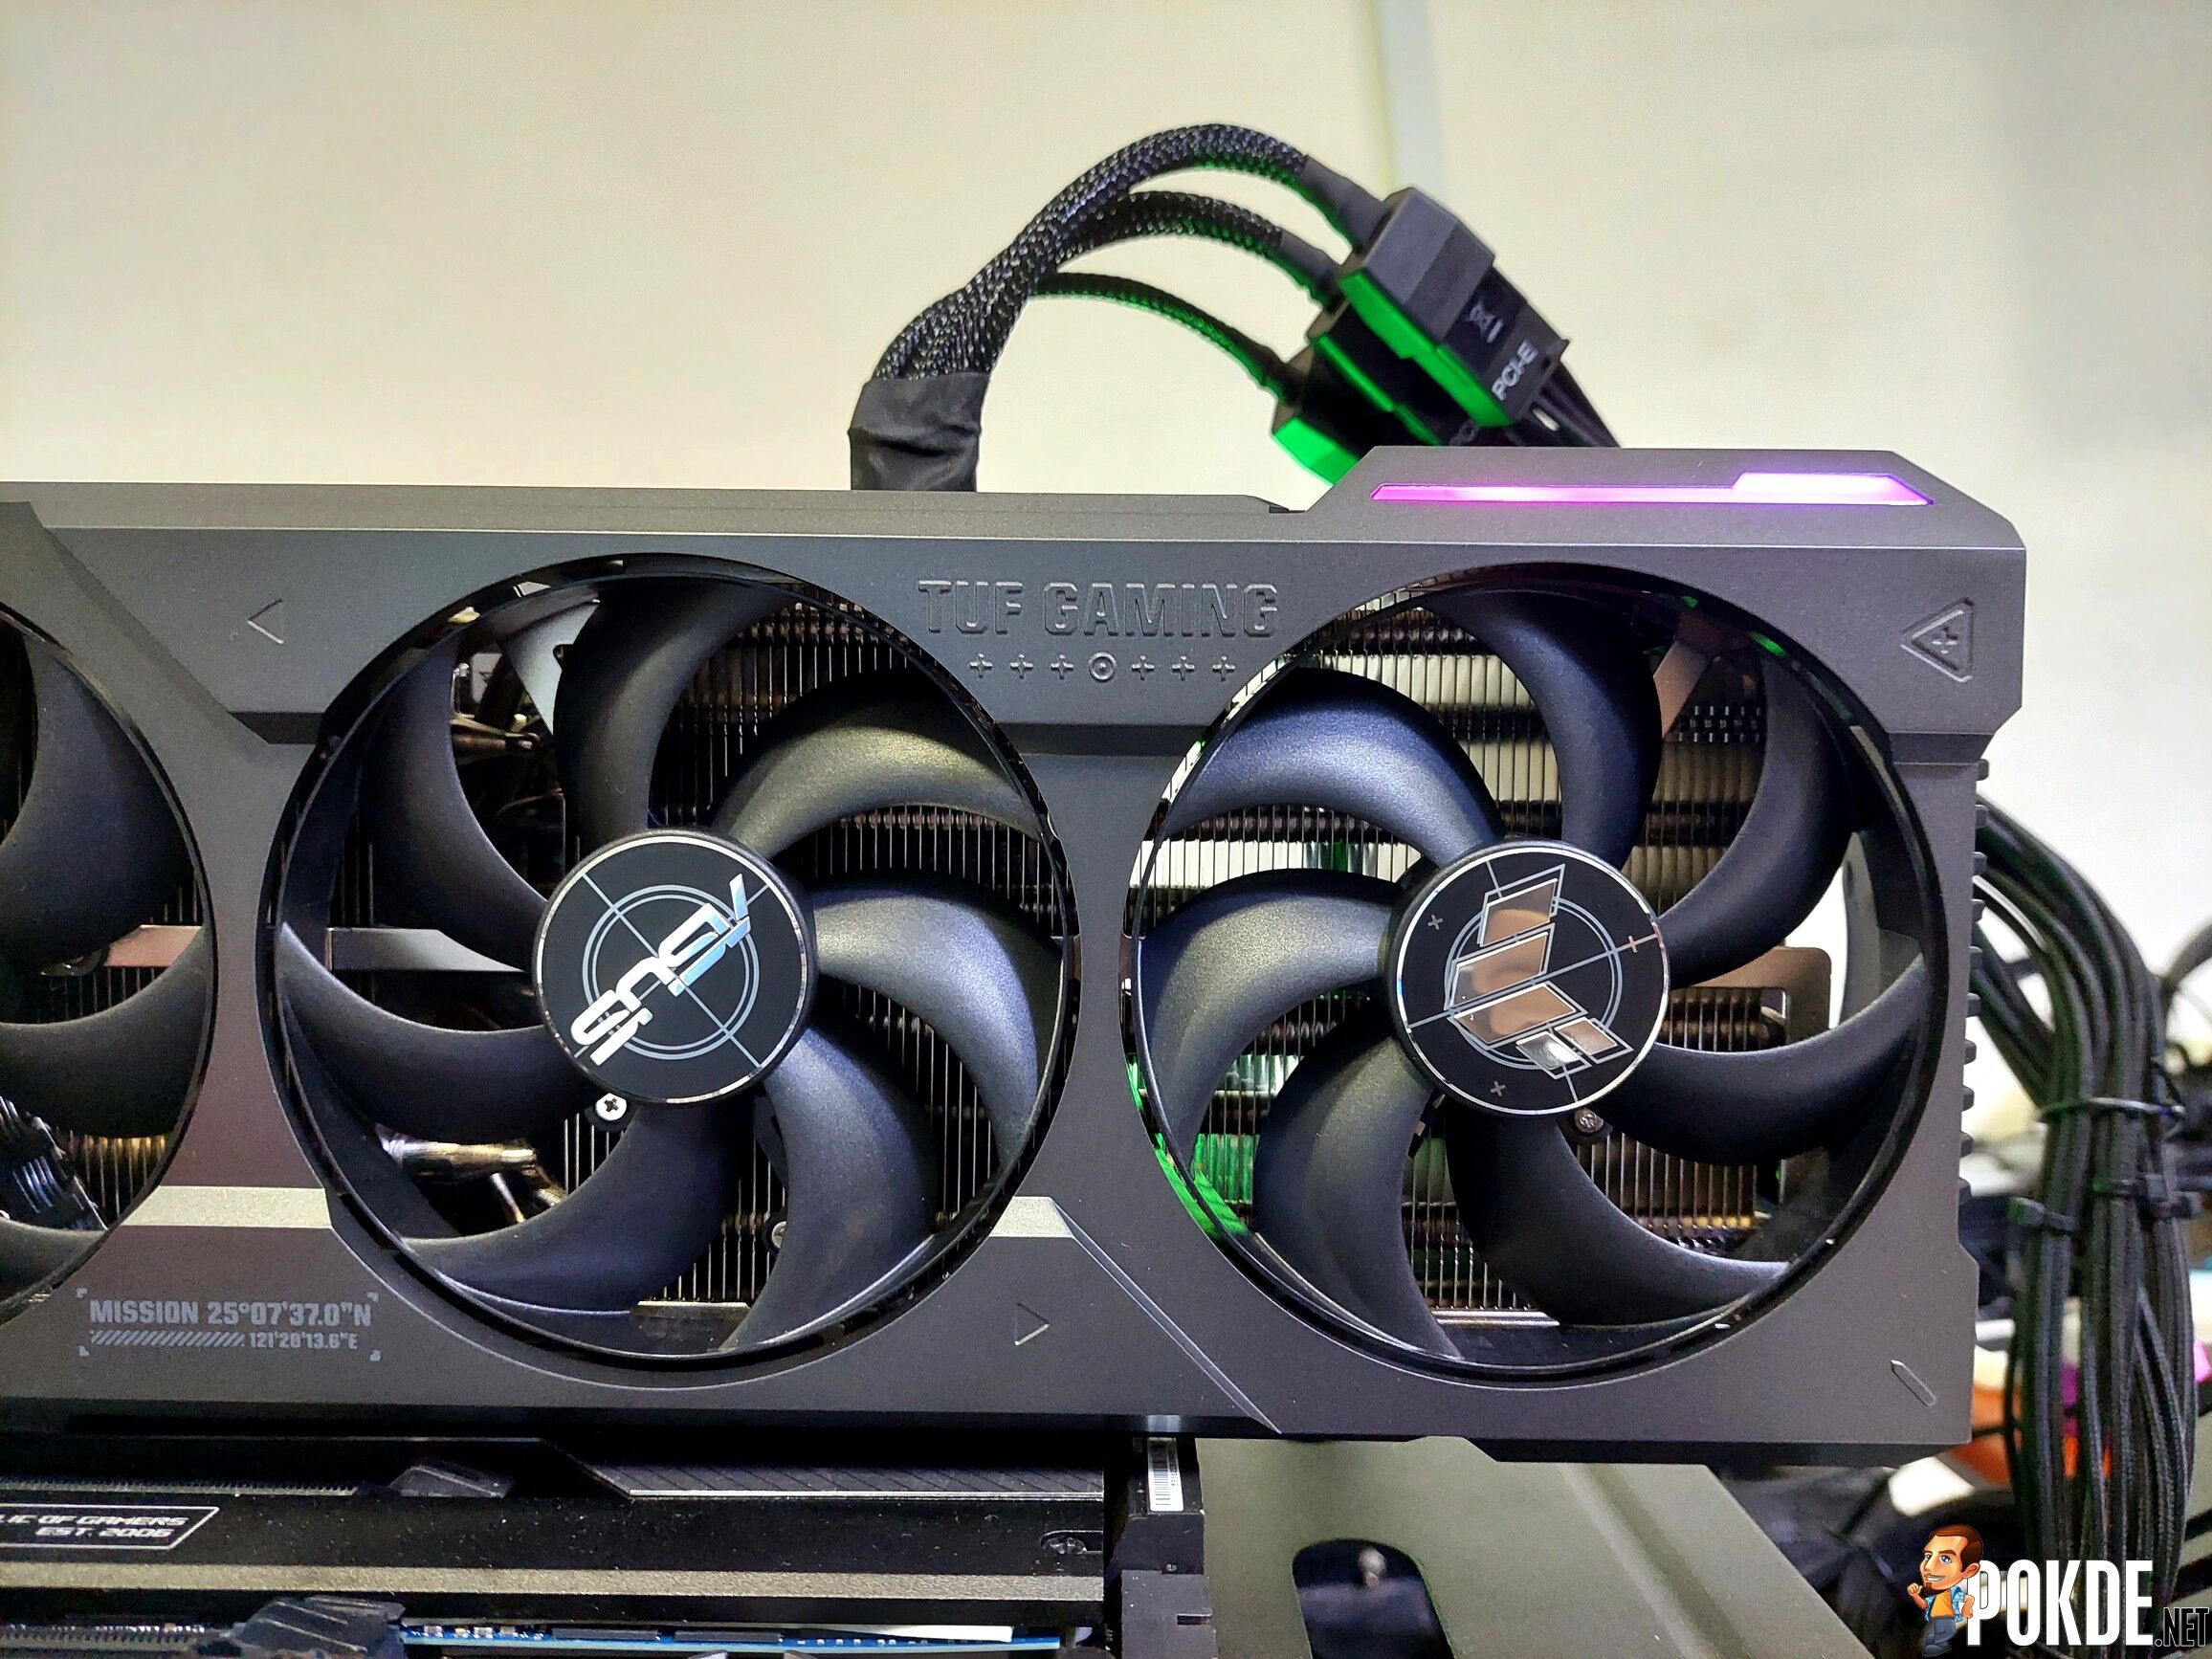 PC/タブレット PCパーツ ASUS TUF Gaming GeForce RTX 4080 16GB OC Edition Review - New 